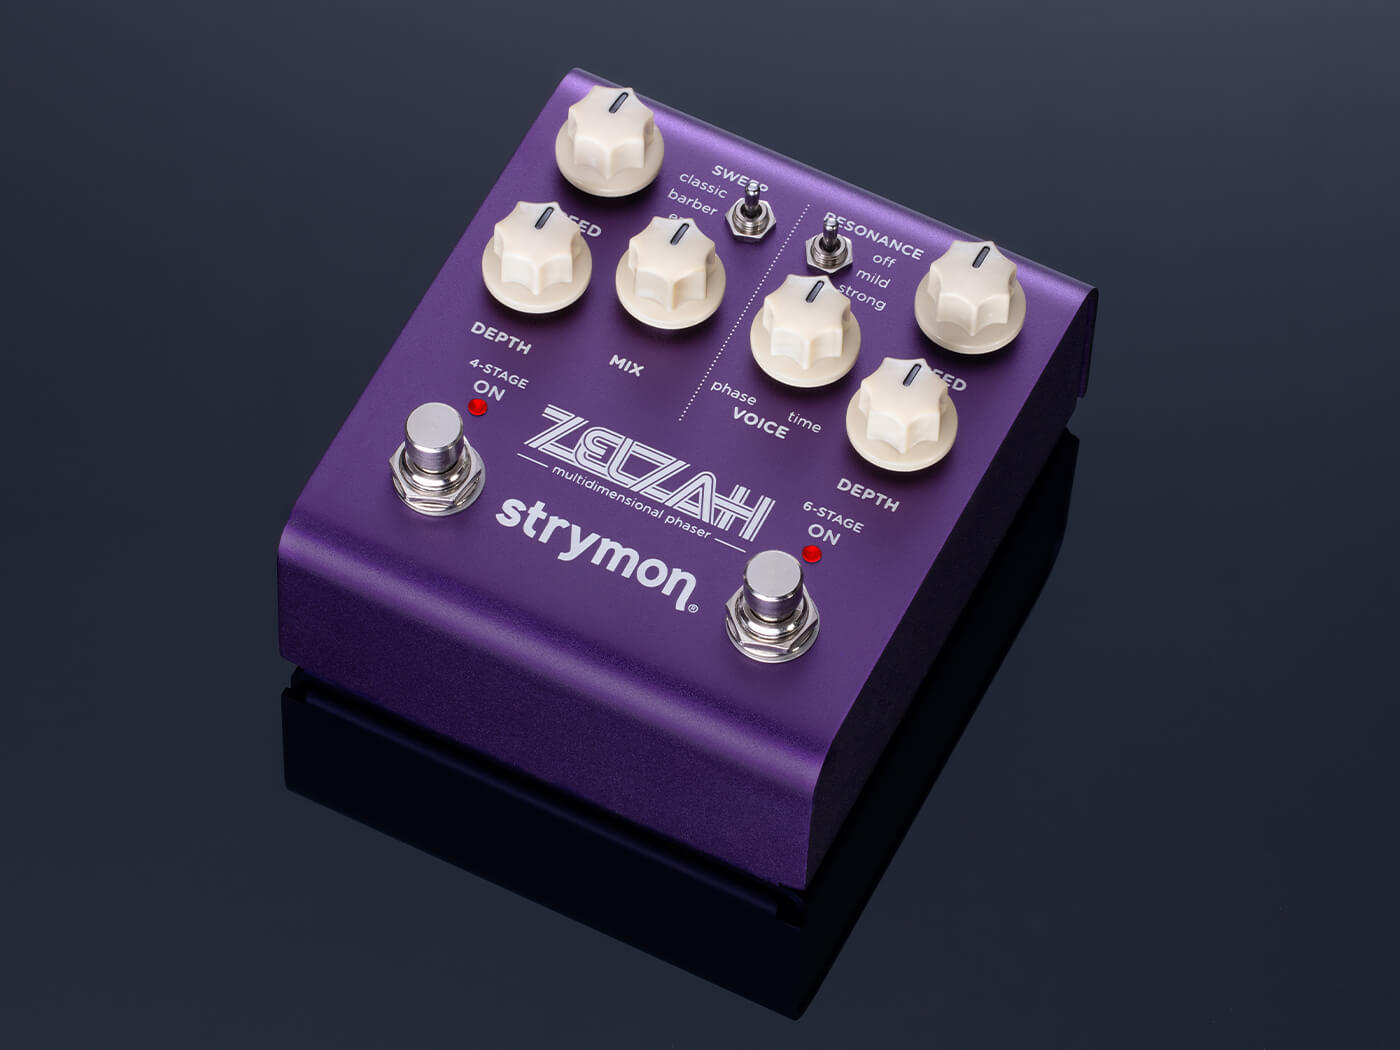 Strymon's Zelzah is a powerful stereo phaser that promises 